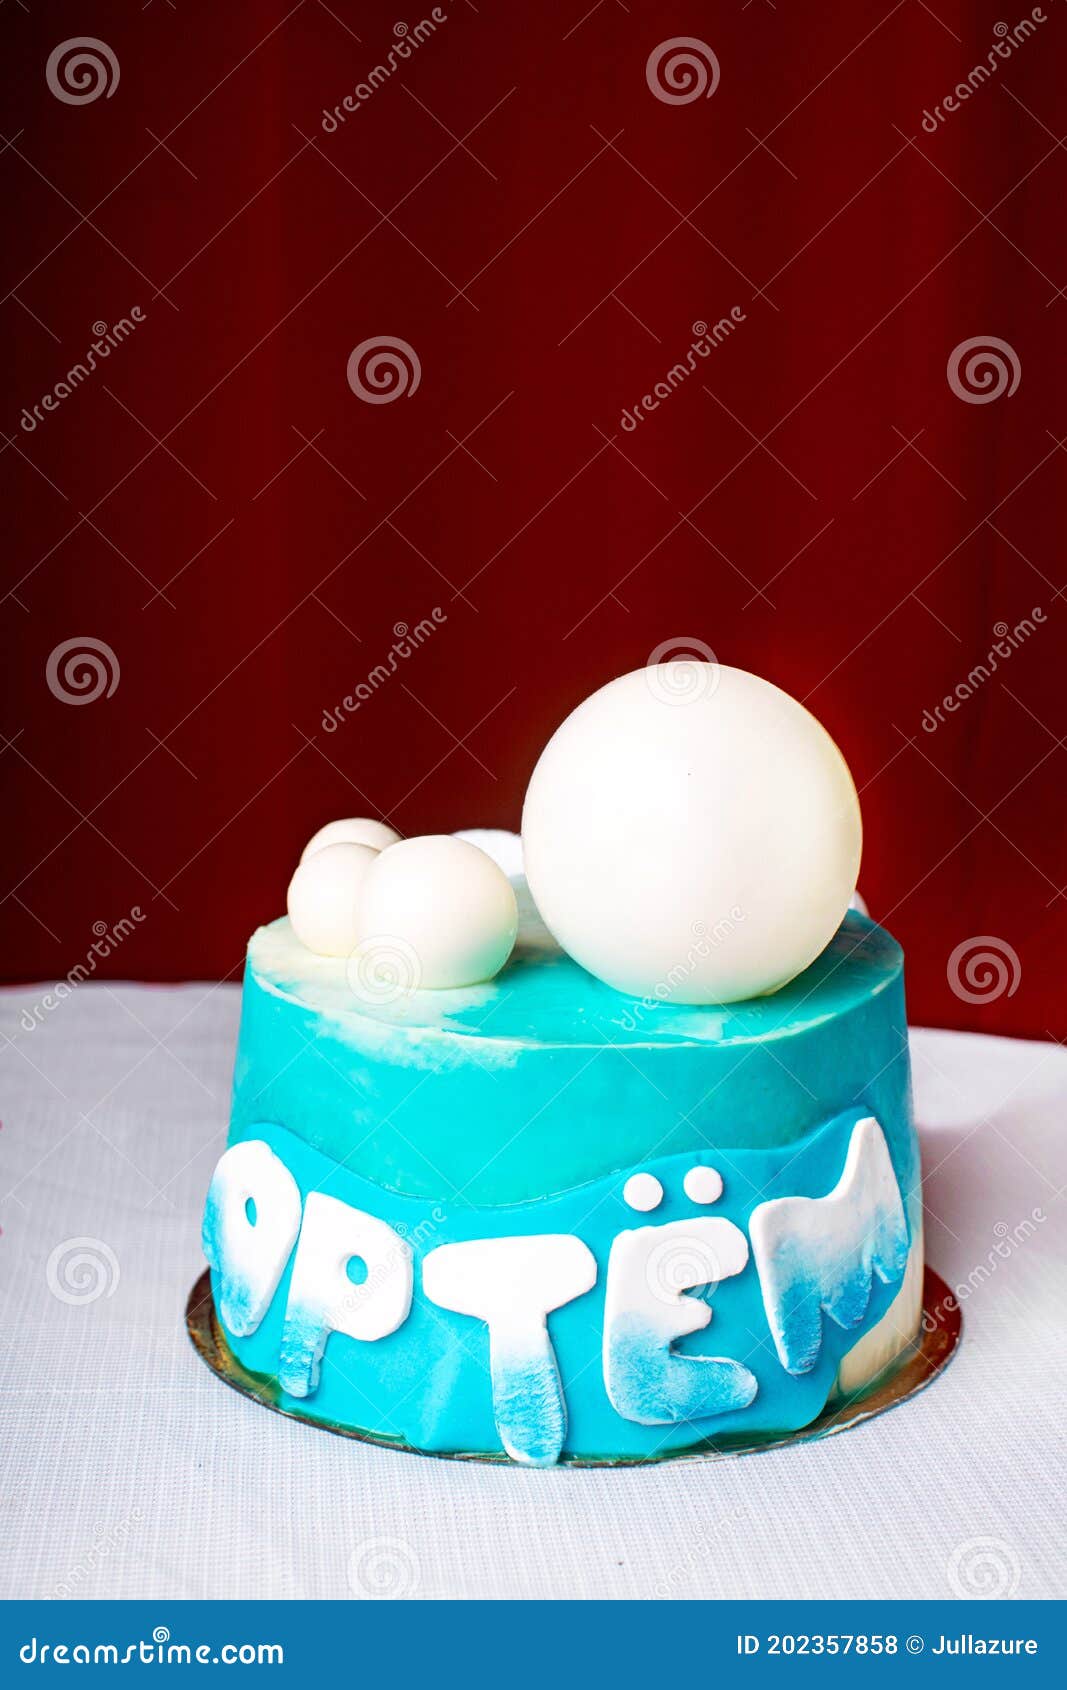 Beautiful Christening Cake for Baby Boy. Cake with Mastic and Angel Wings  Stock Photo - Image of greeting, child: 202357858